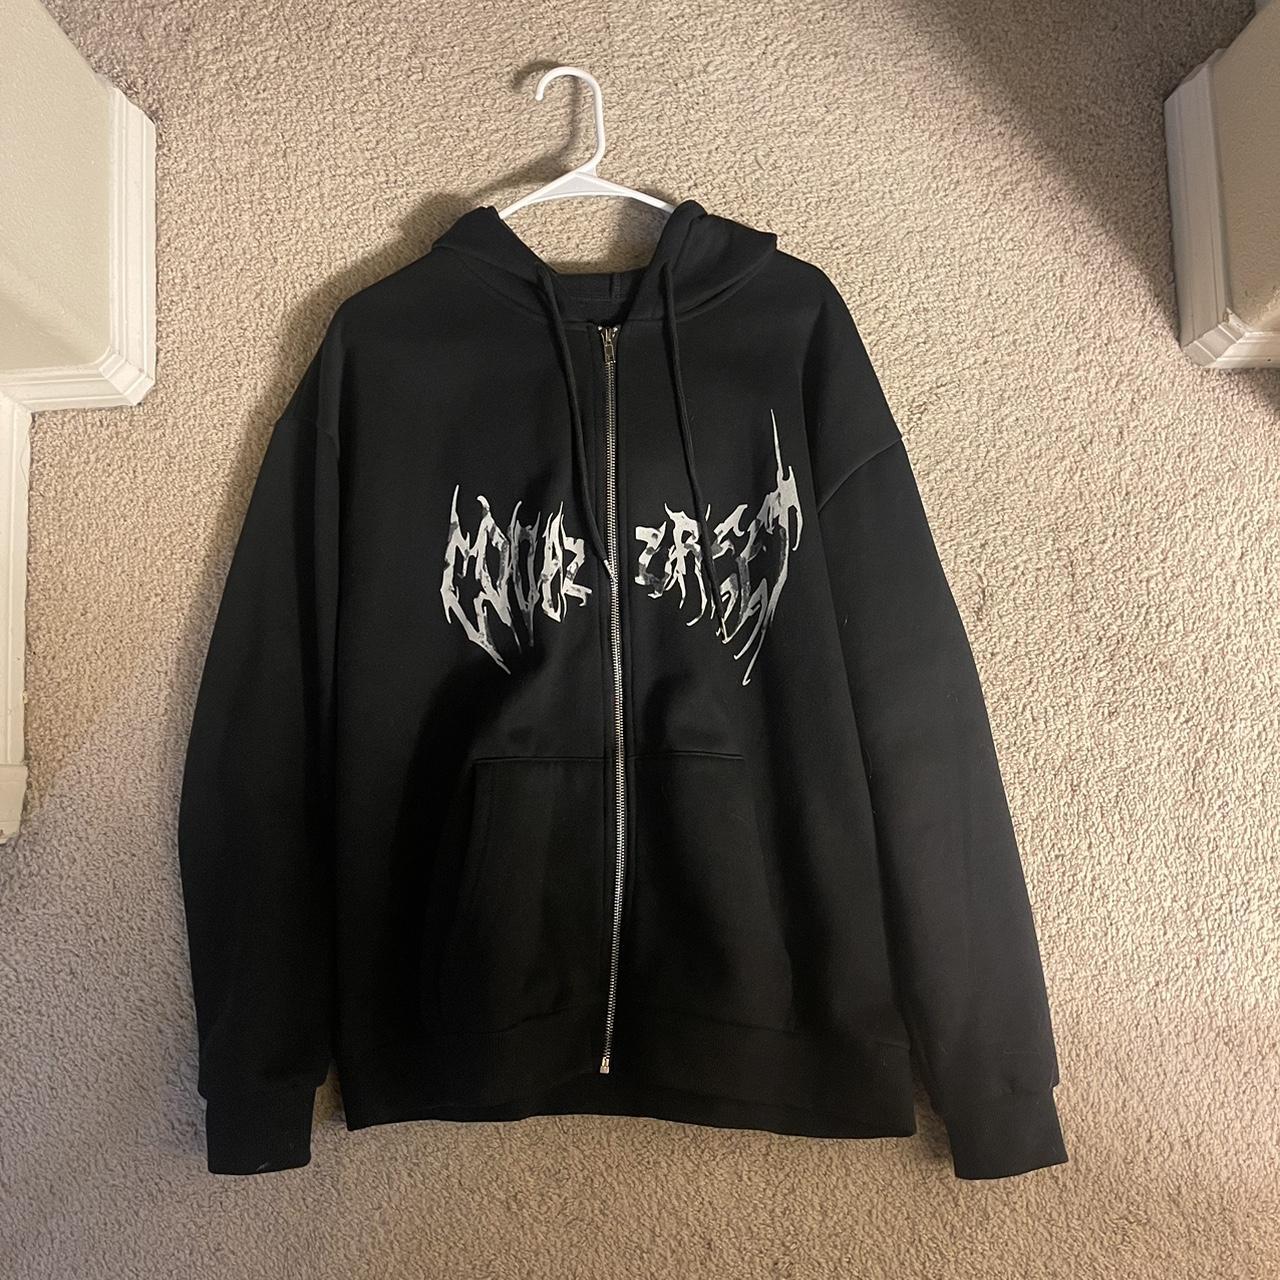 Black hoodie with cool graphic design Don’t think I... - Depop